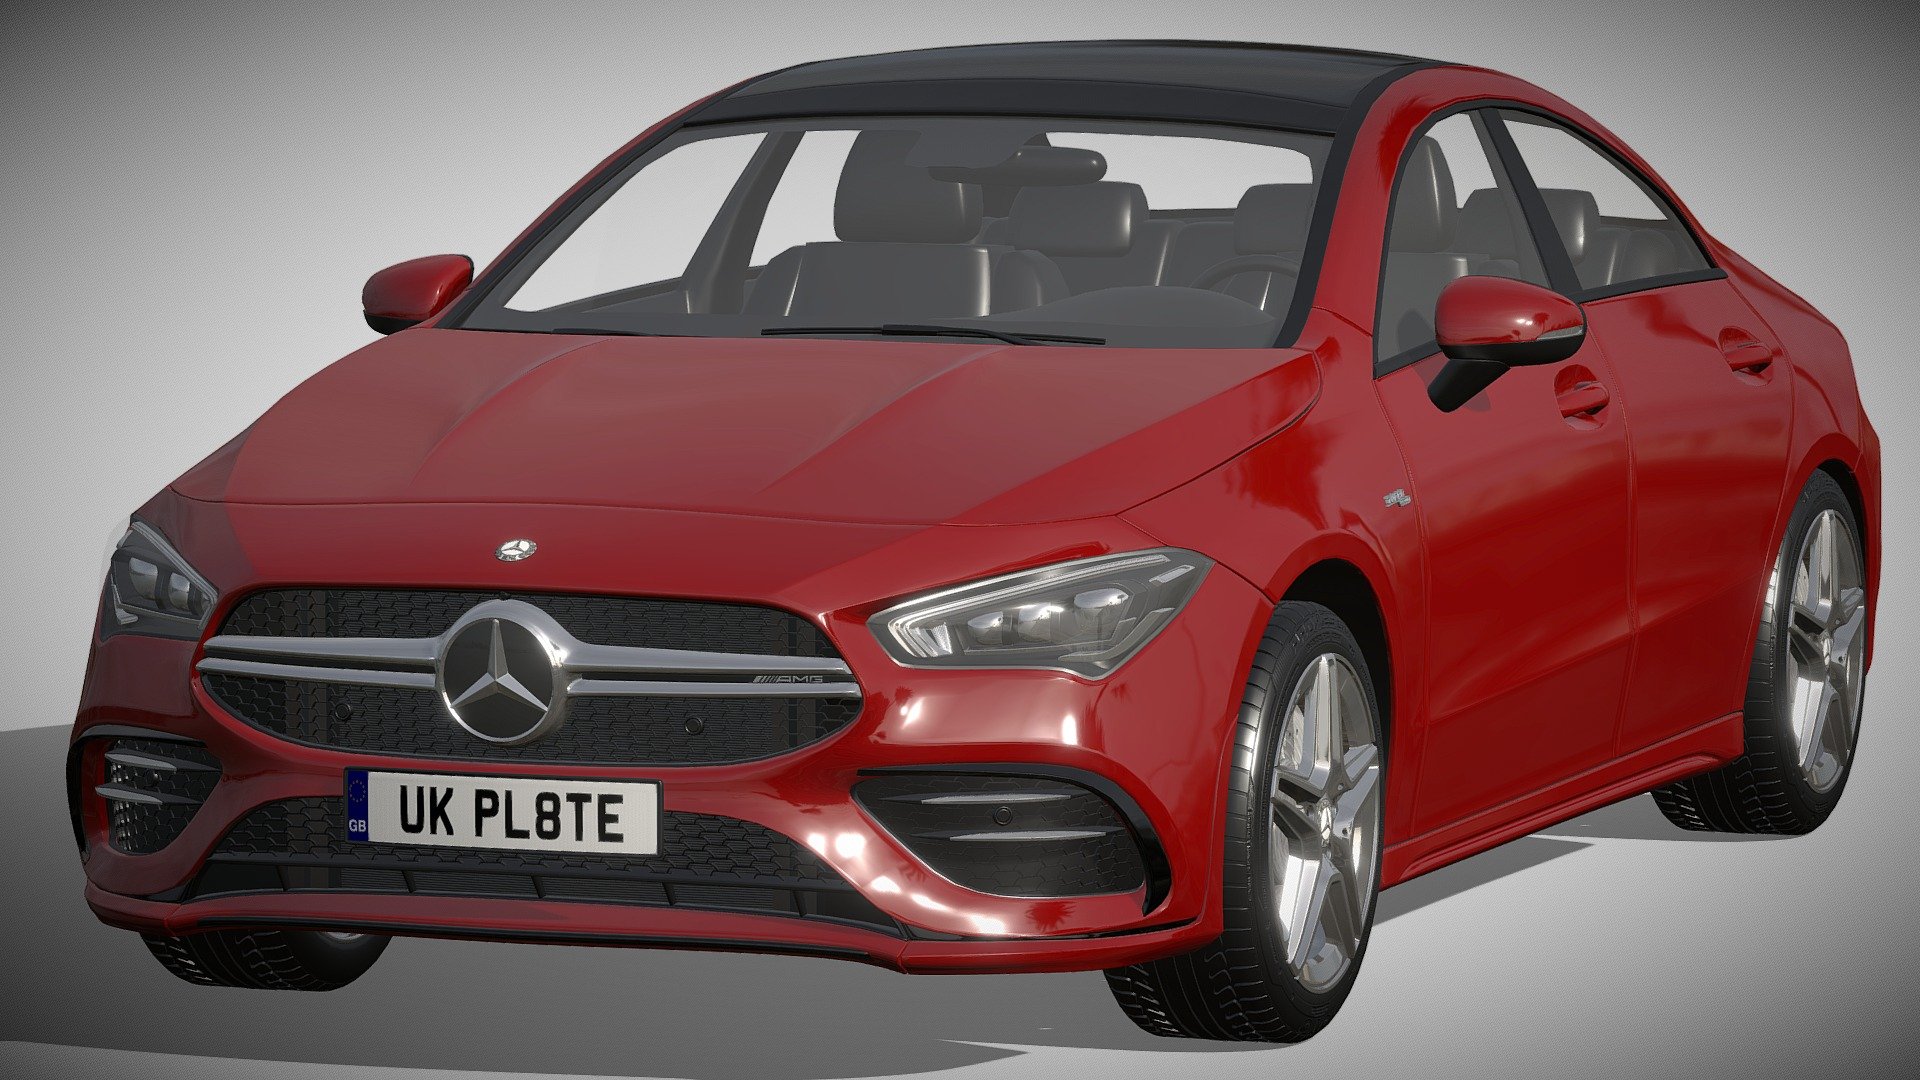 Mercedes-Benz CLA 35 AMG 2020

https://www.mercedes-benz.com/en/vehicles/passenger-cars/cla/mercedes-amg-cla-35-4matic/

Clean geometry Light weight model, yet completely detailed for HI-Res renders. Use for movies, Advertisements or games

Corona render and materials

All textures include in *.rar files

Lighting setup is not included in the file! - Mercedes-Benz CLA 35 AMG 2020 - Buy Royalty Free 3D model by zifir3d 3d model